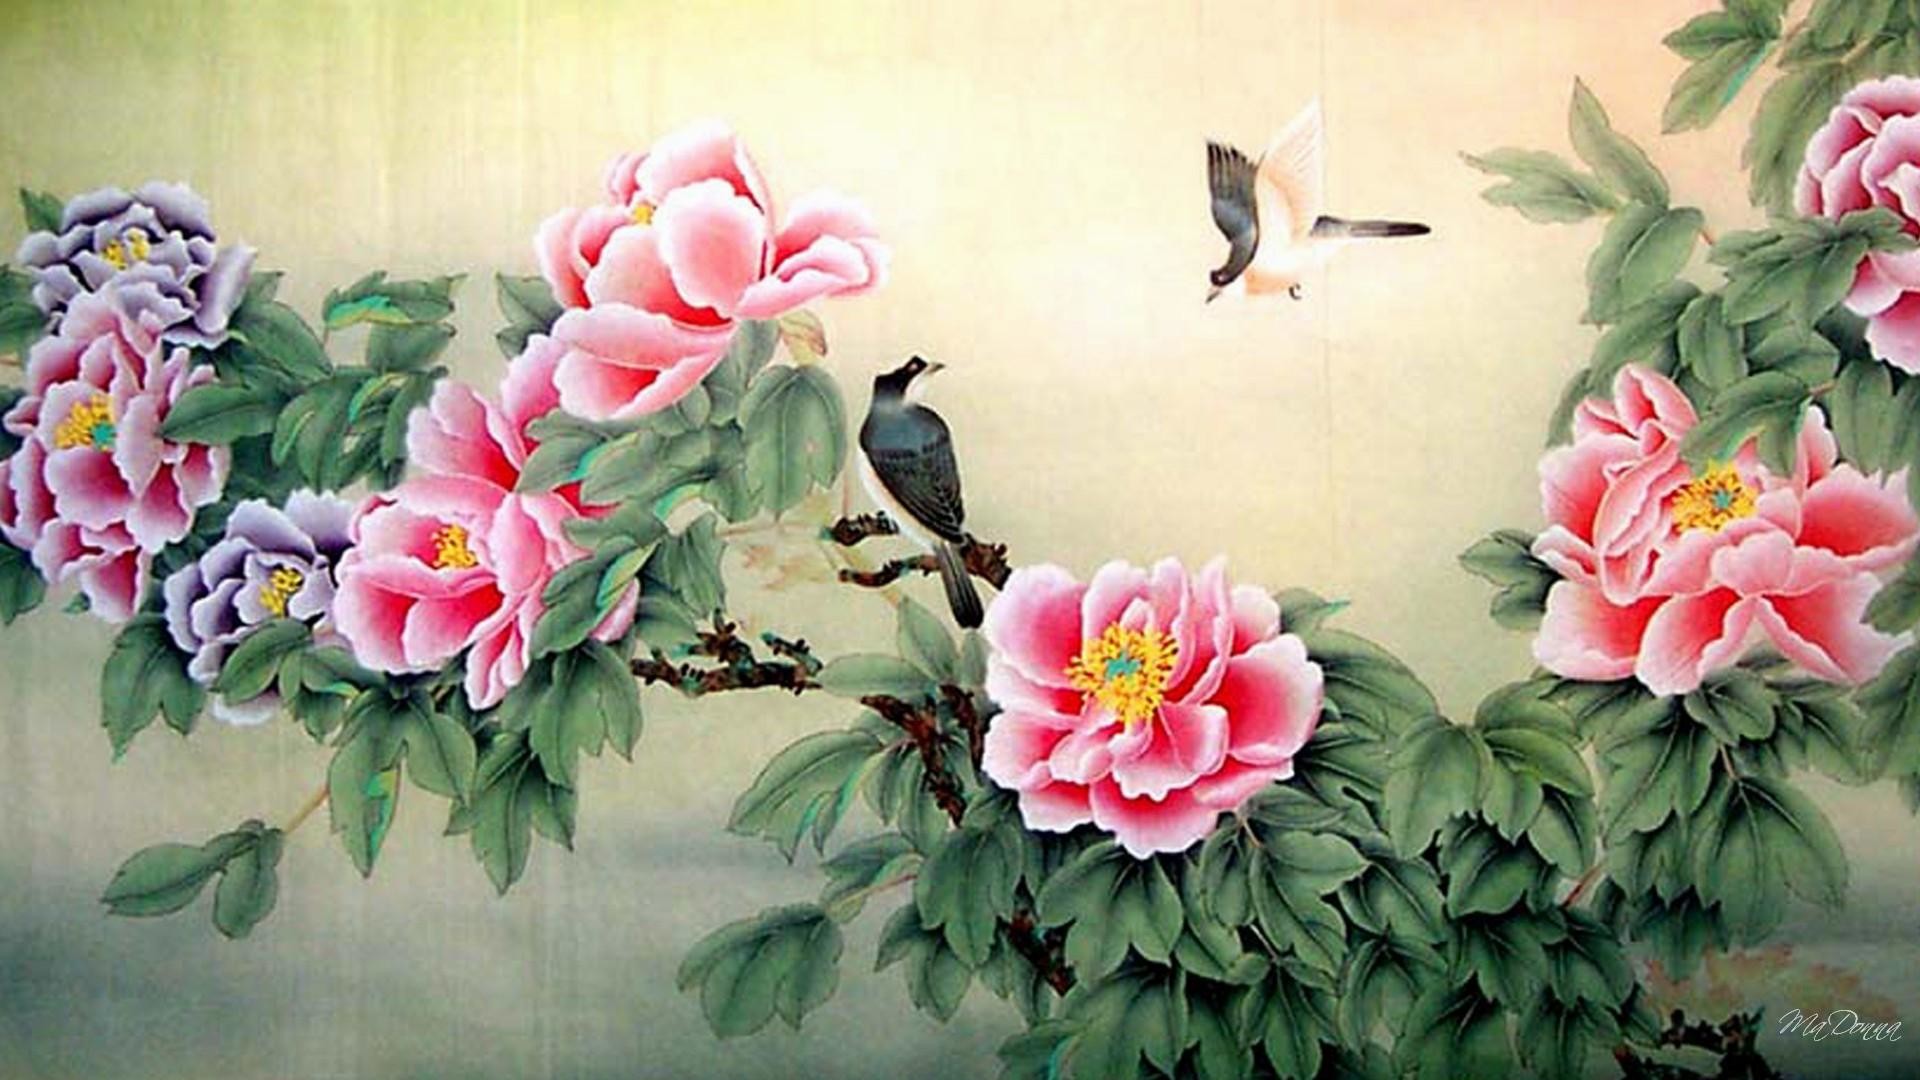 1920x1080 6. chinese-flowers-wallpaper6-600x338